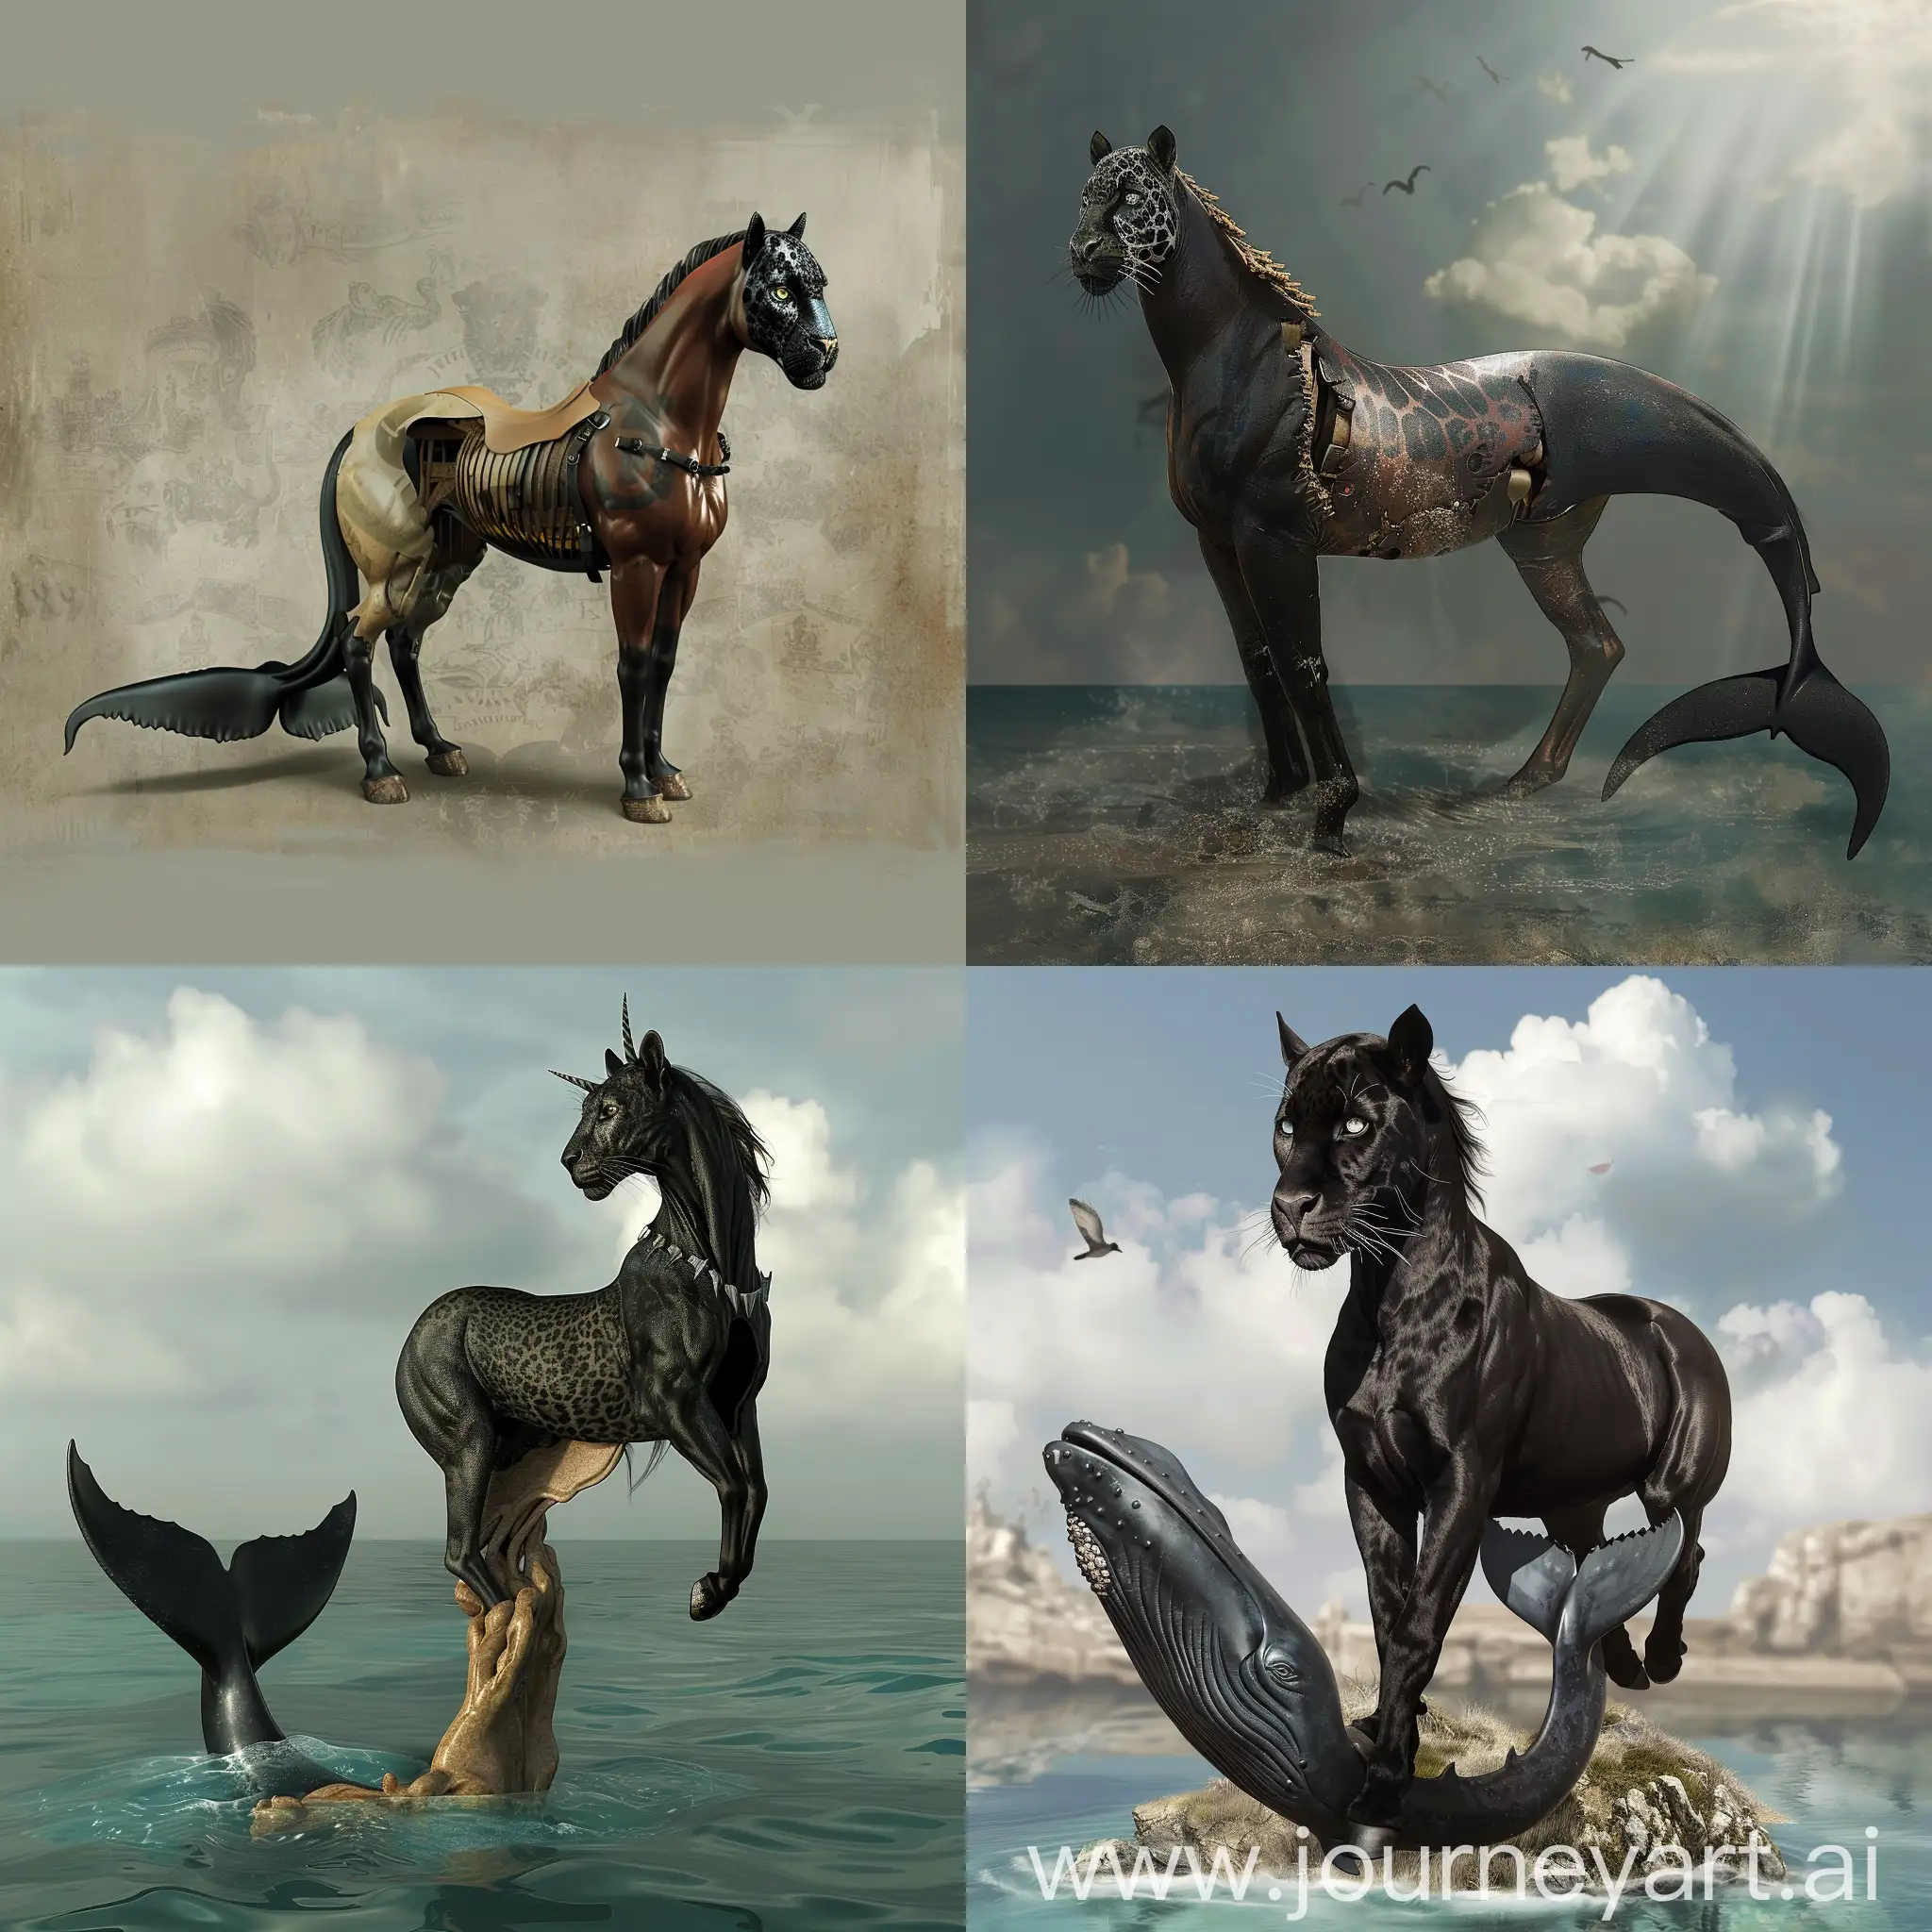 WhaleTailed-Horse-with-Black-Panther-Head